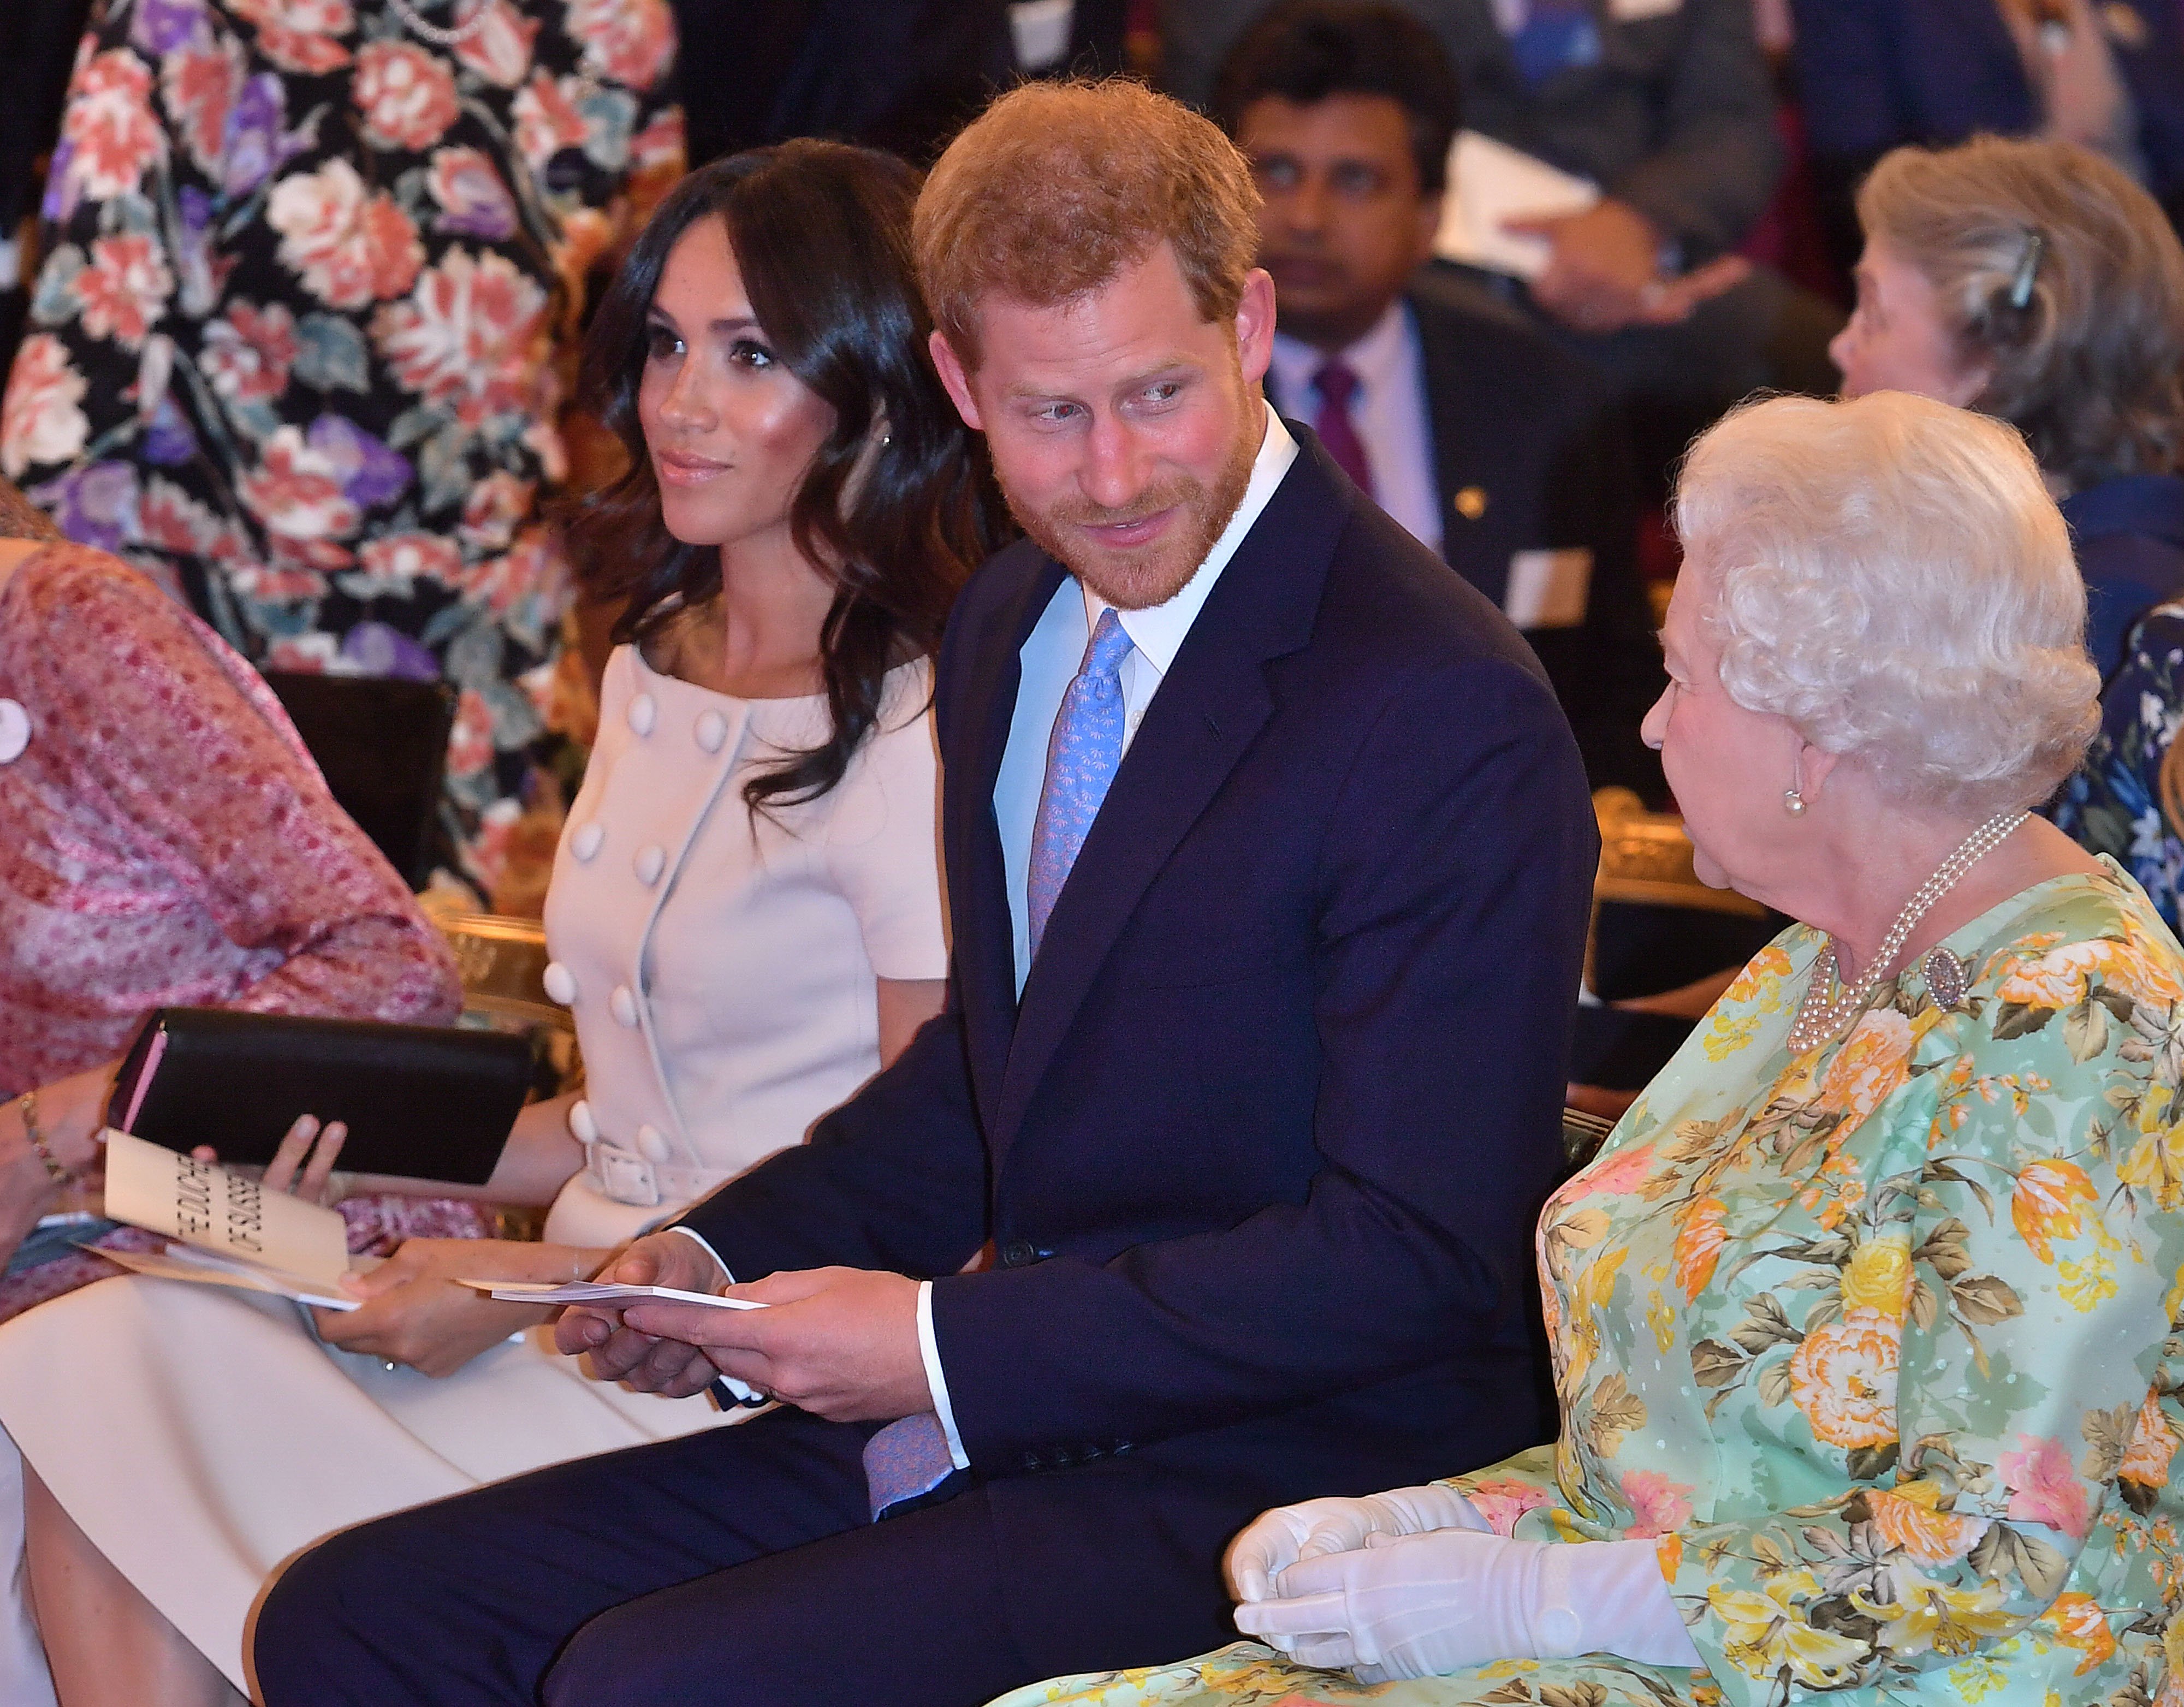 Duchess Meghan, Prince Harry, and Queen Elizabeth II at the Queen's Young Leaders Award Ceremony on June 26, 2018, in London, England. | Source: Getty Images